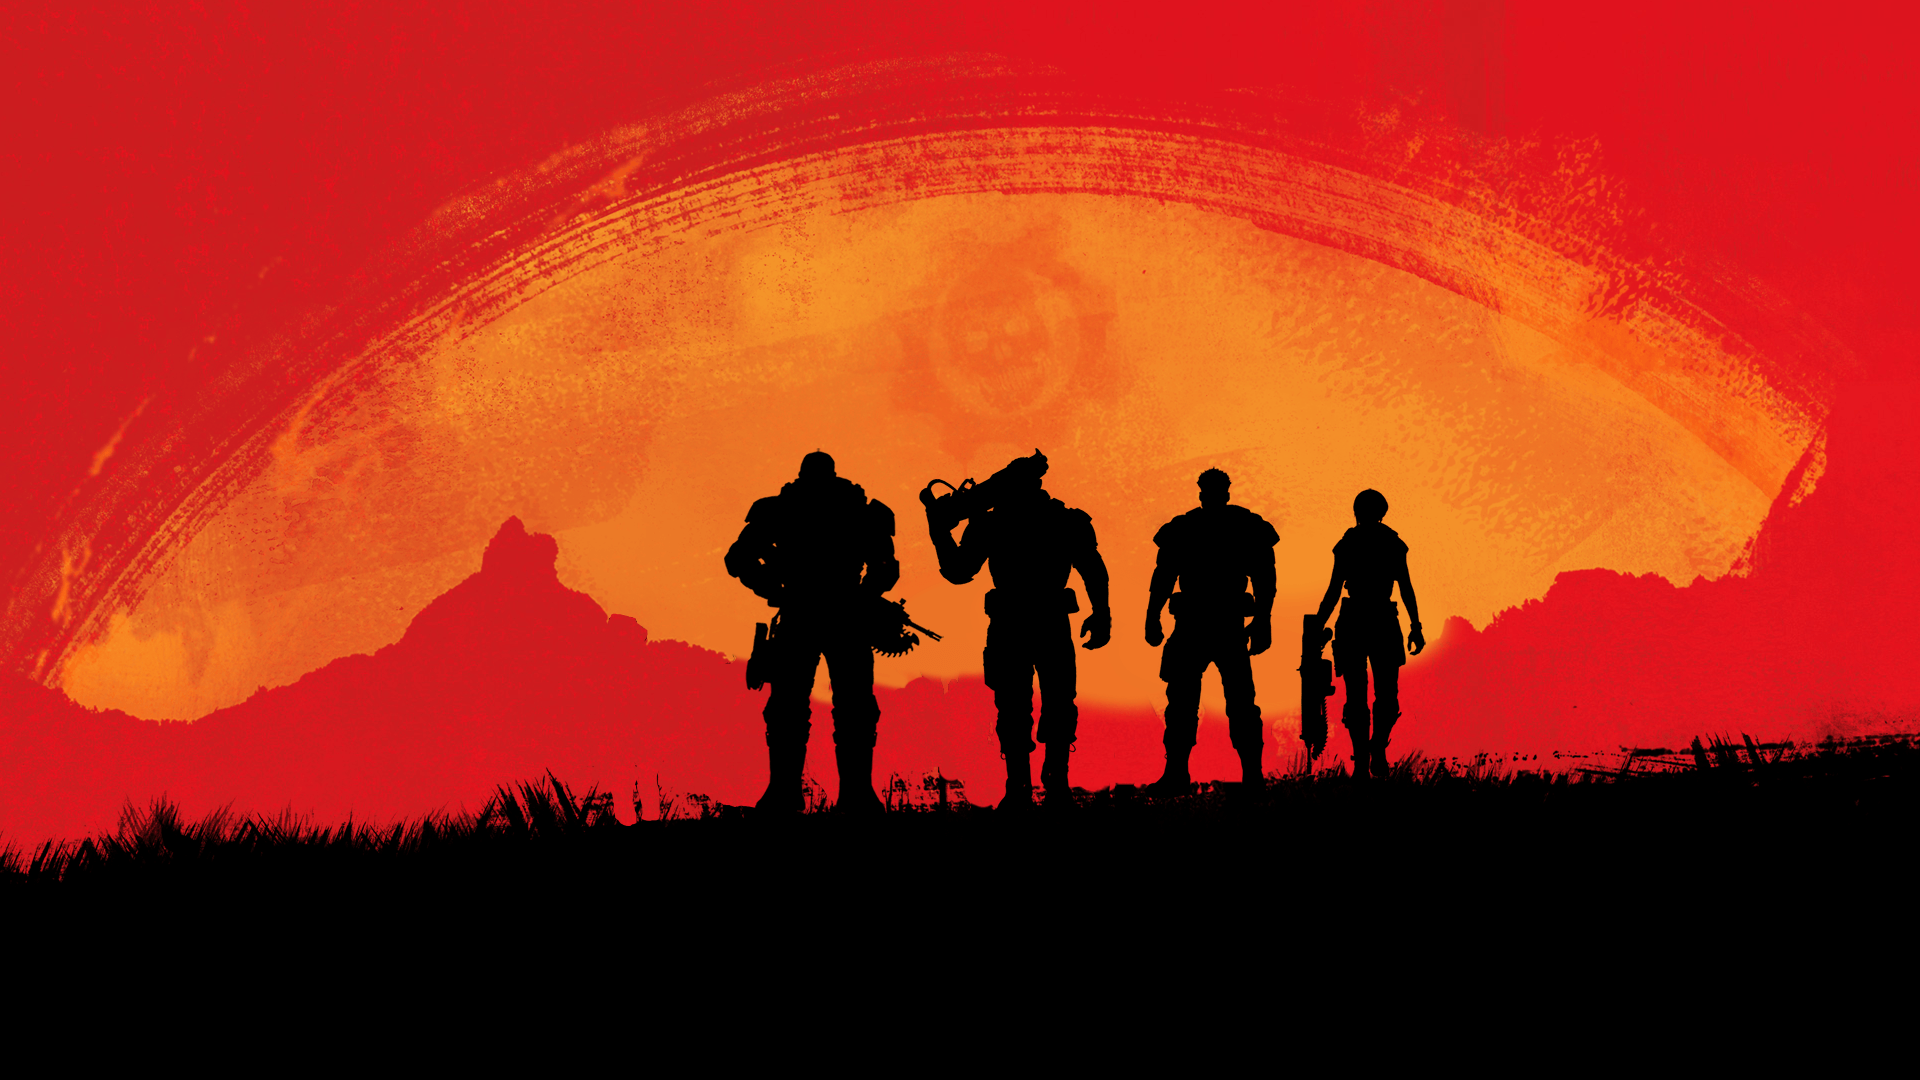 hd red dead redemption 2 image